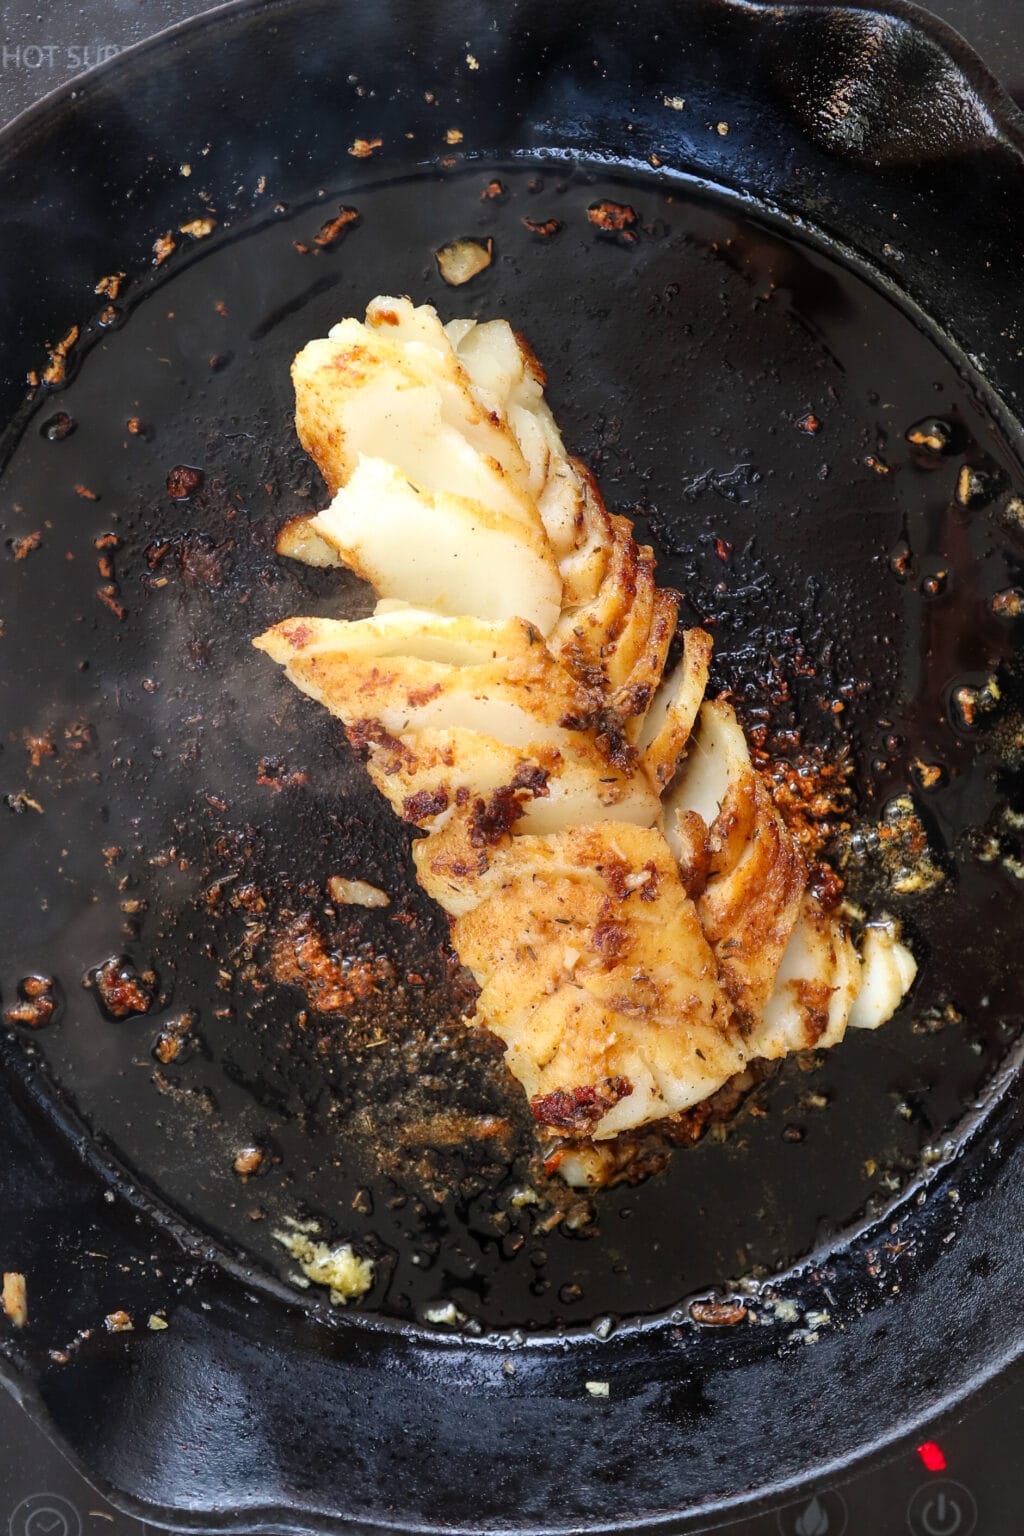 A zoomed in image of a black cast iron pan. There is fully browned garlic and cajun seasoing stuck to the pan. In the middle is pan-seared cod. The cod is starting to flake apart and the cajun coating is blackening.